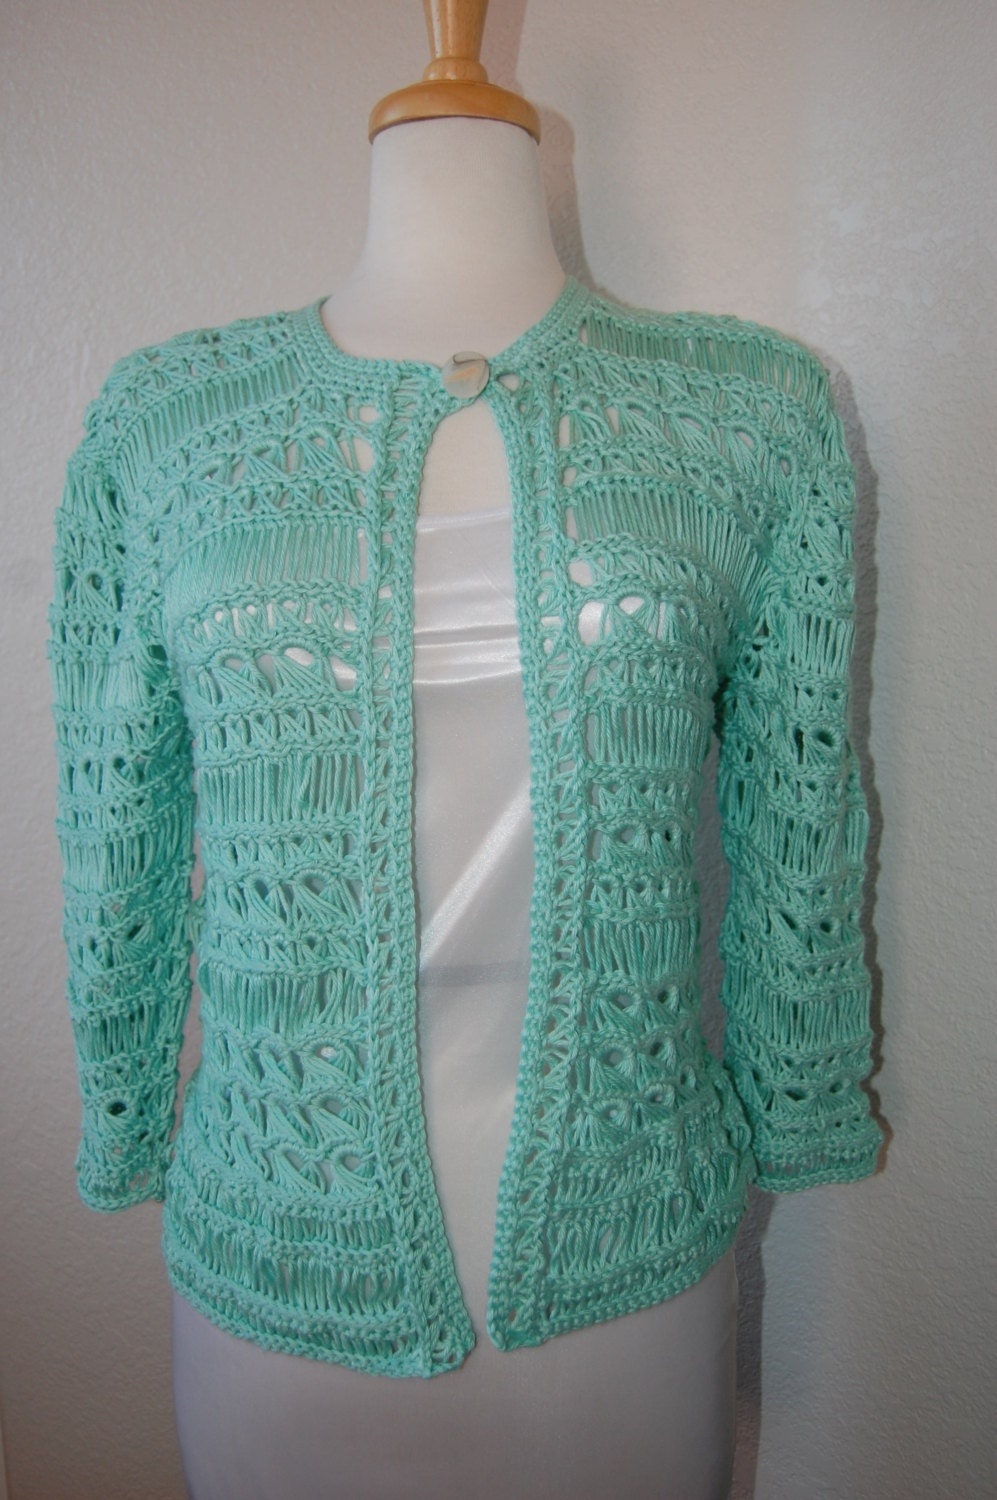 Crochet Cardigan Broomstick Lace in Soft Green Pima by LoyesThread